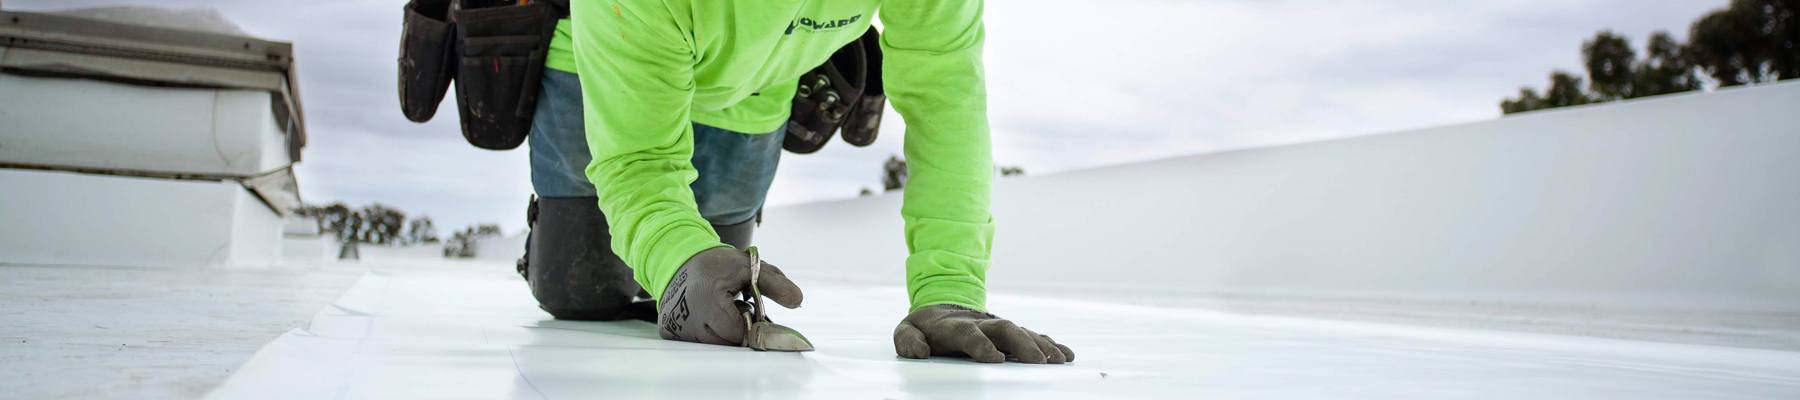 Quality Architectural Metal & Roofing is located in Birmingham, Al providing Polyvinyl chloride (PVC) roofing materials are highly engineered to withstand the test of time, providing long term performance even under the toughest conditions.